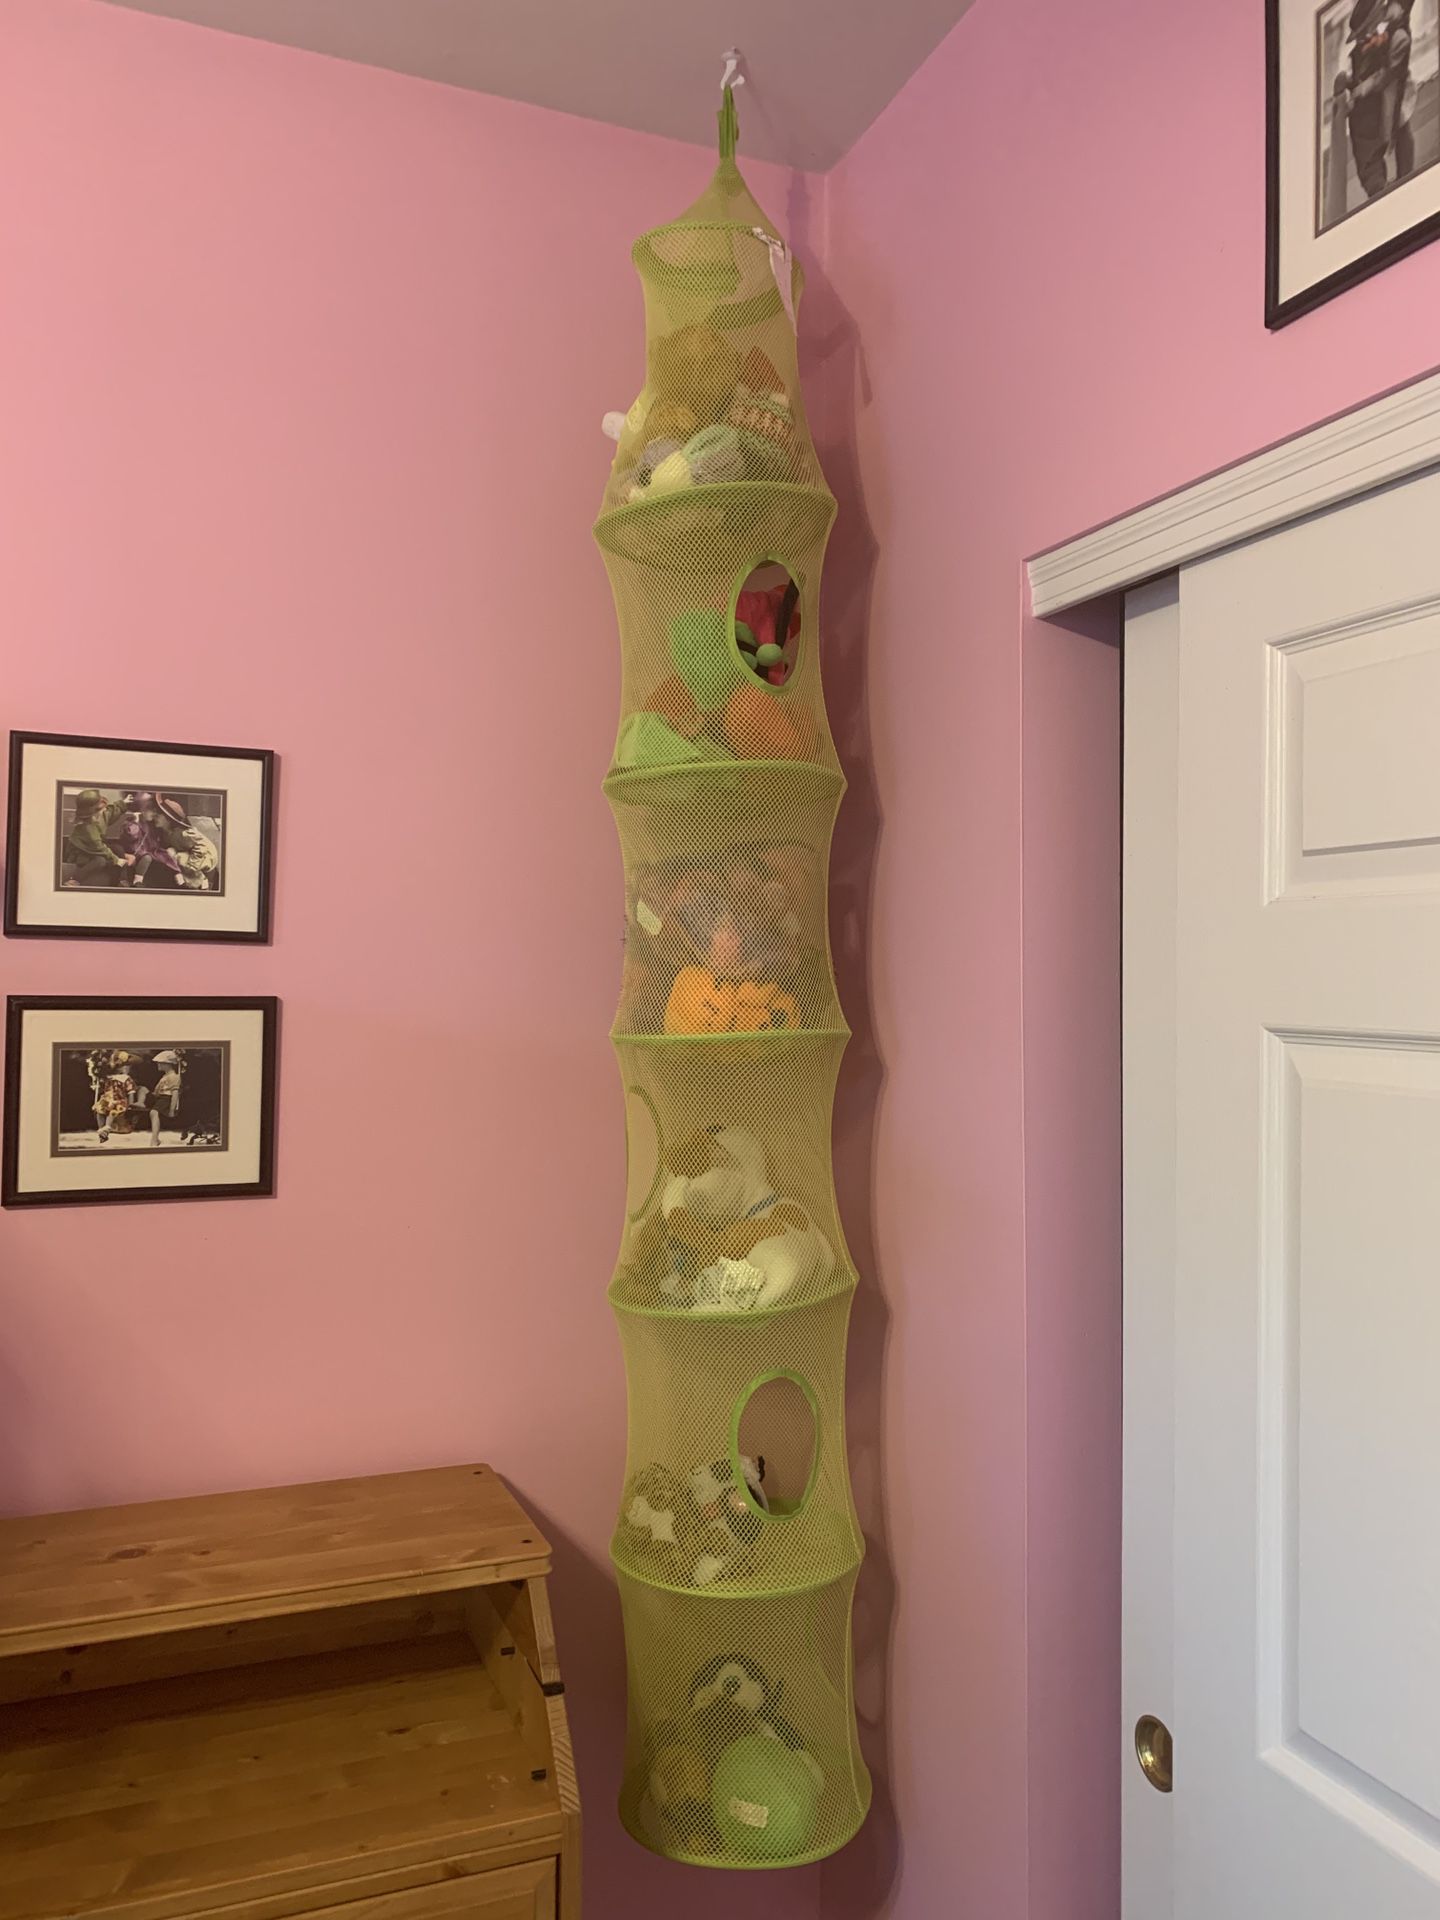 6 foot hanging Stuffed Animal Holder- in great shape. Color is lime green.